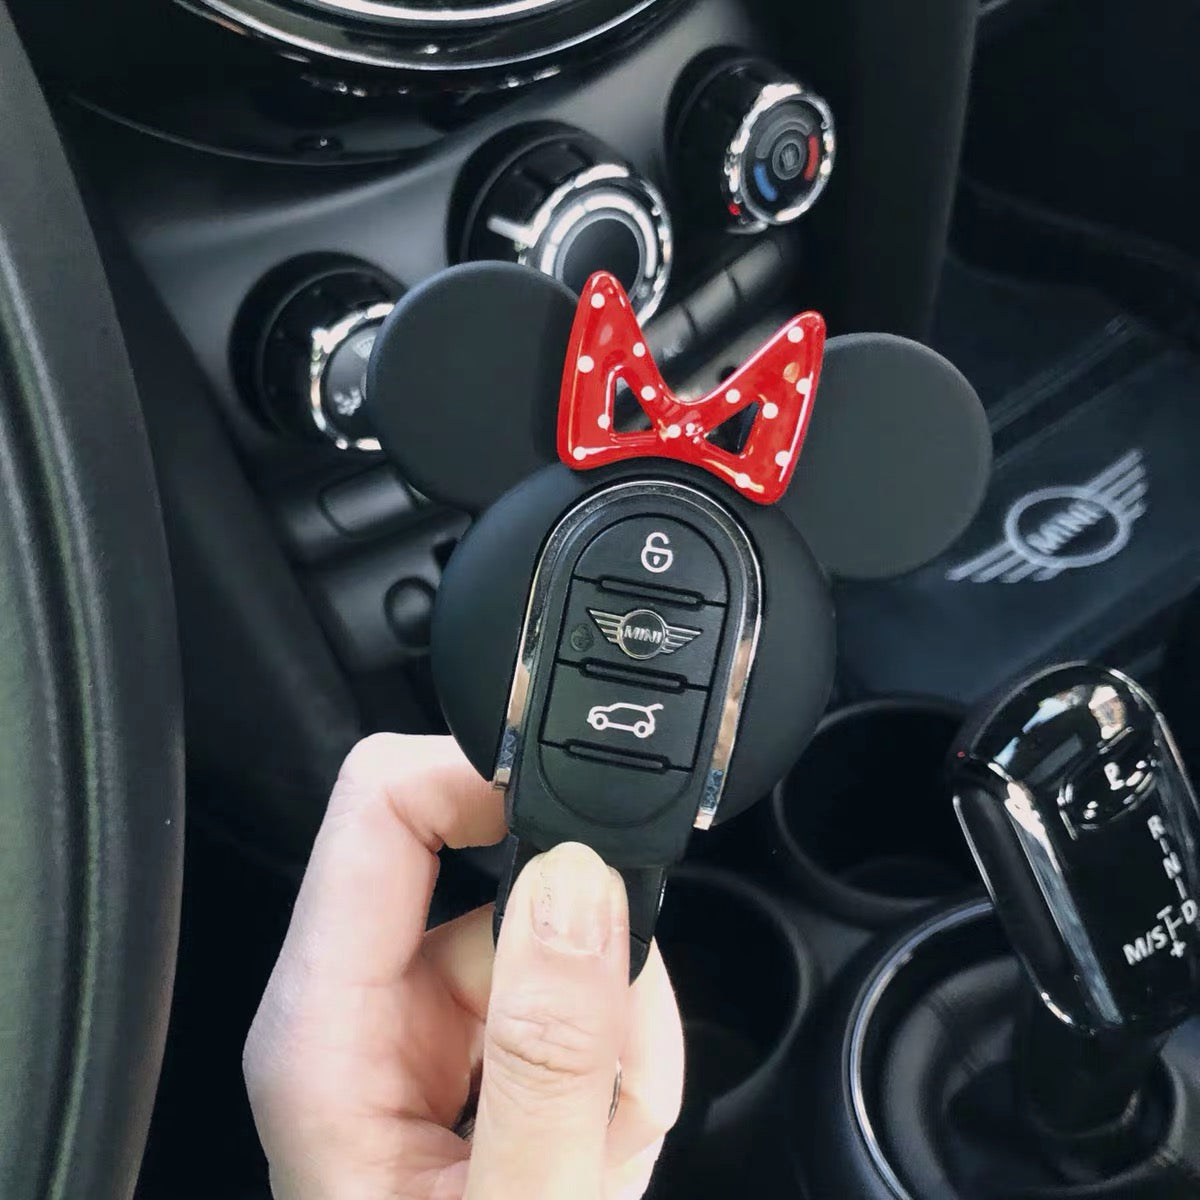 Mickey Minnie Mouse Inspired Keychain